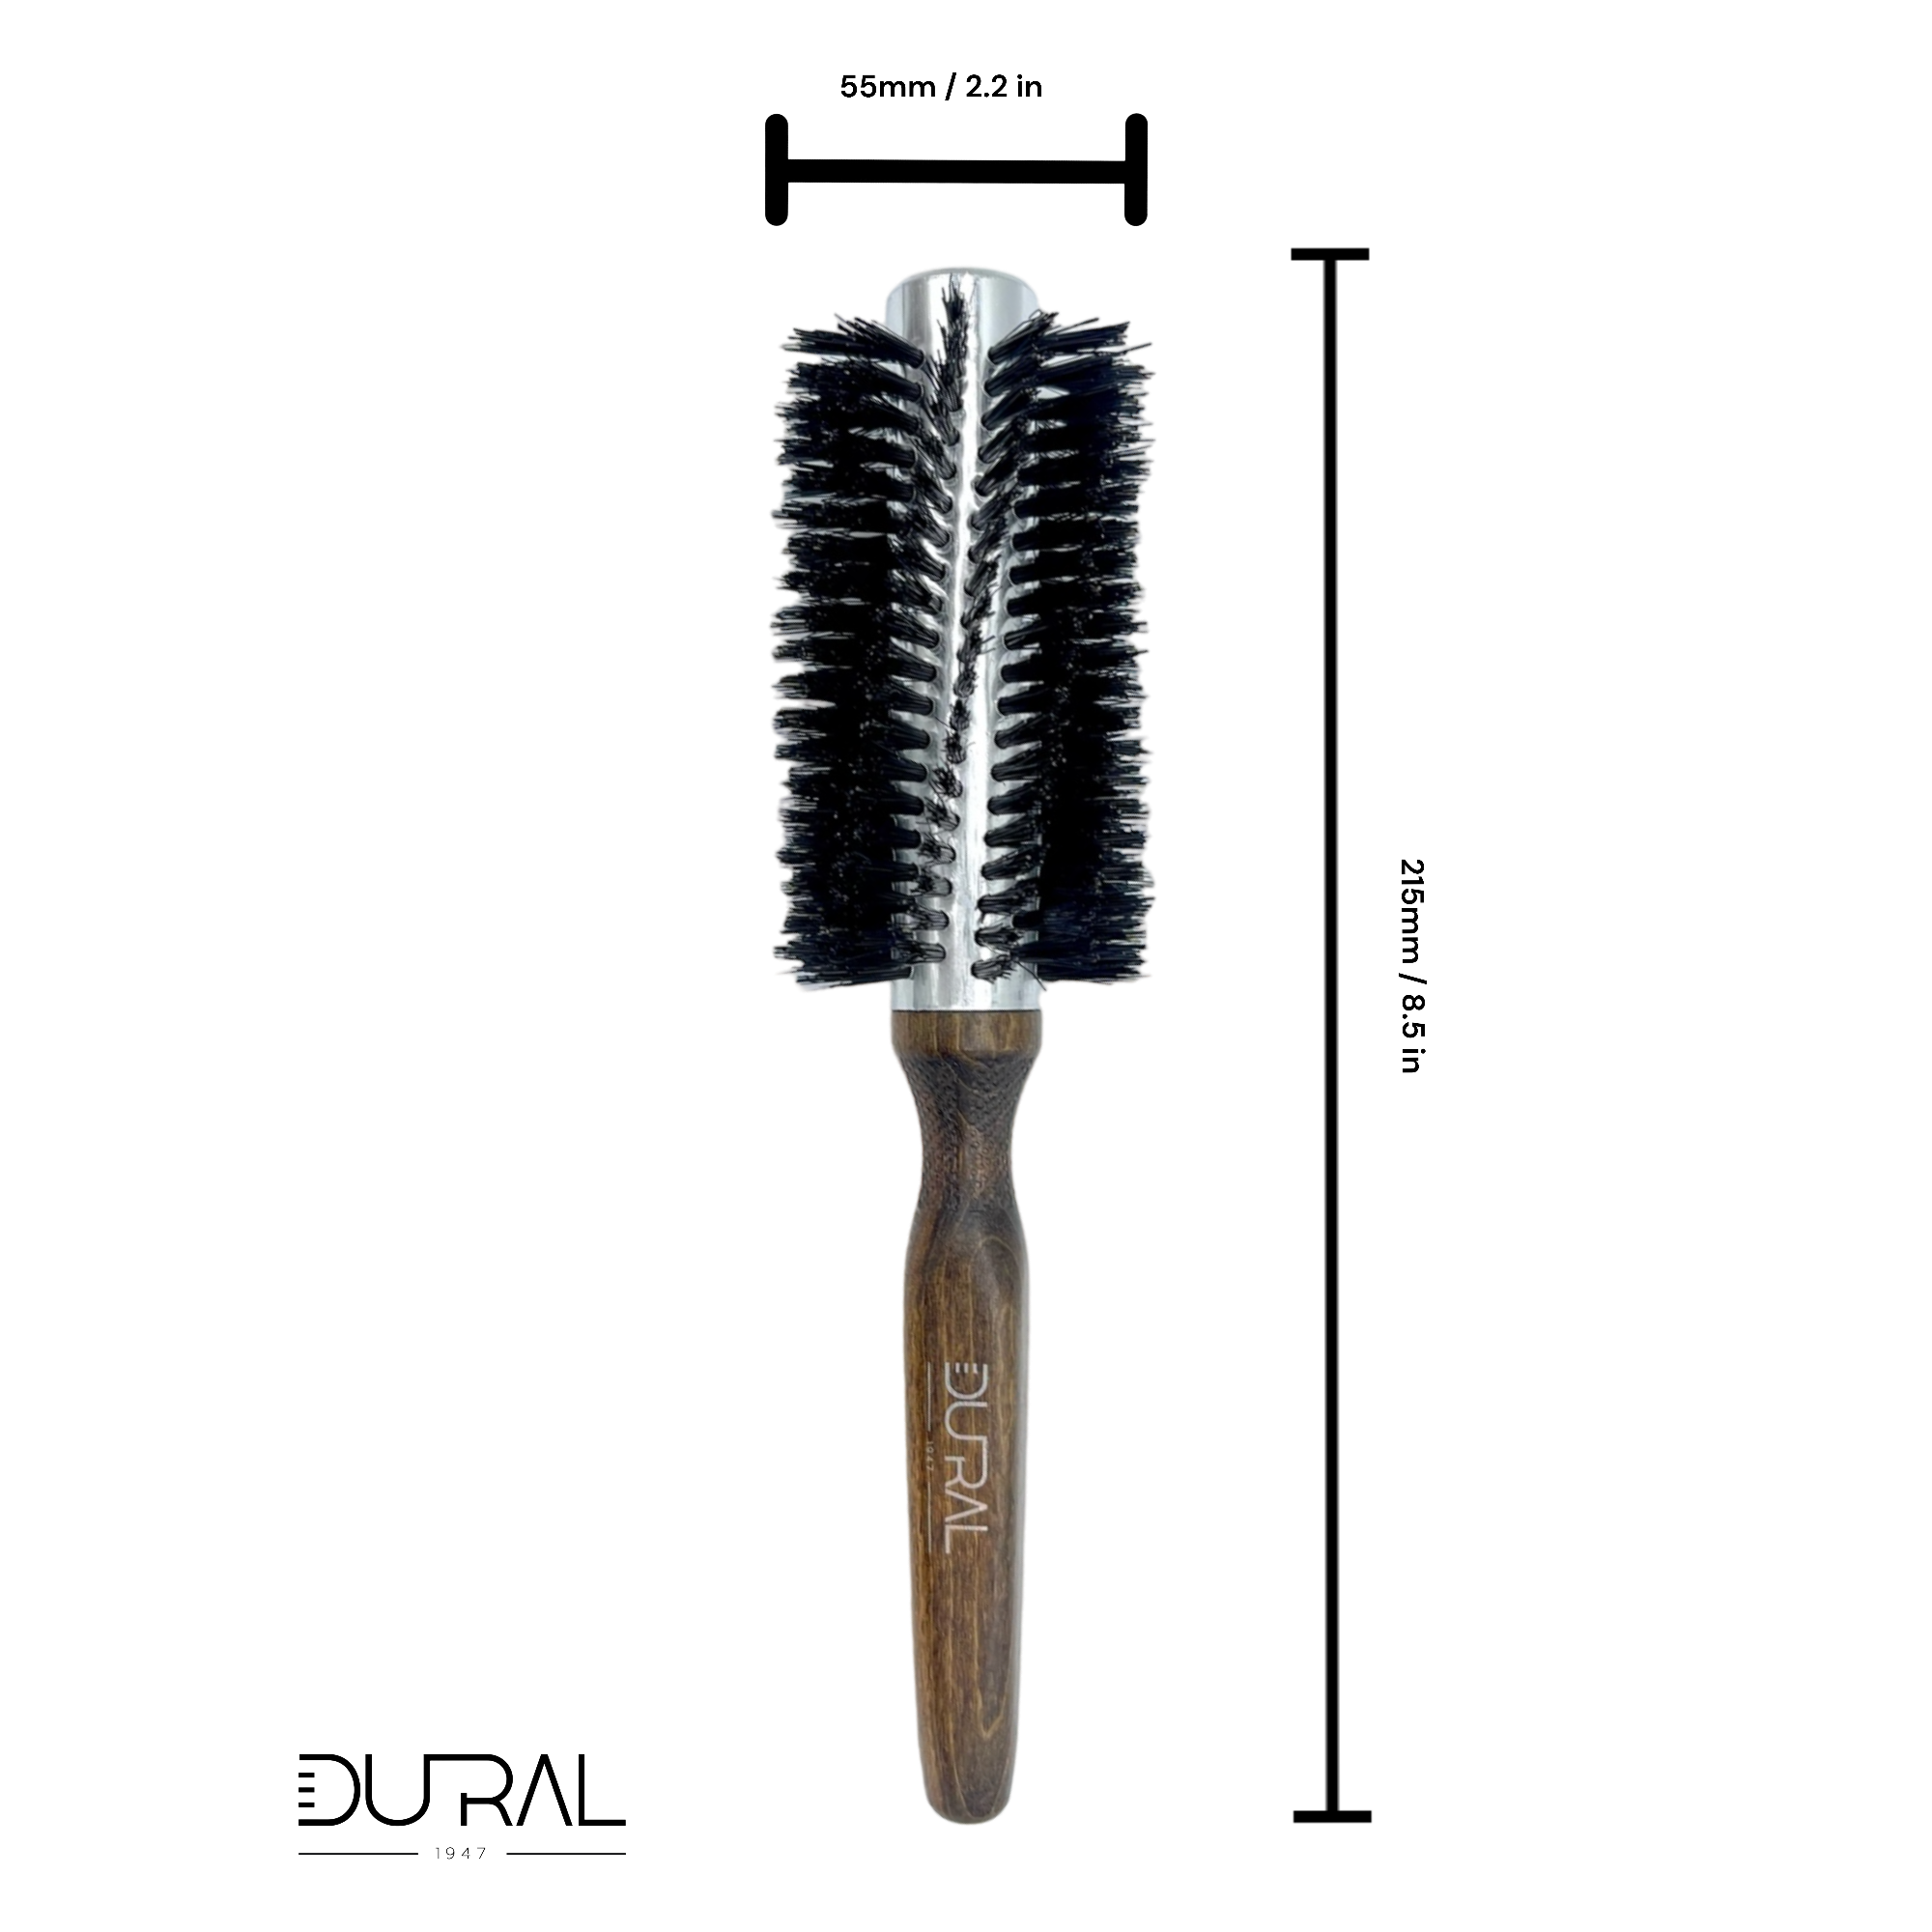 Dural Beech wood quick-styler hair brush with boar bristles - 12 rows